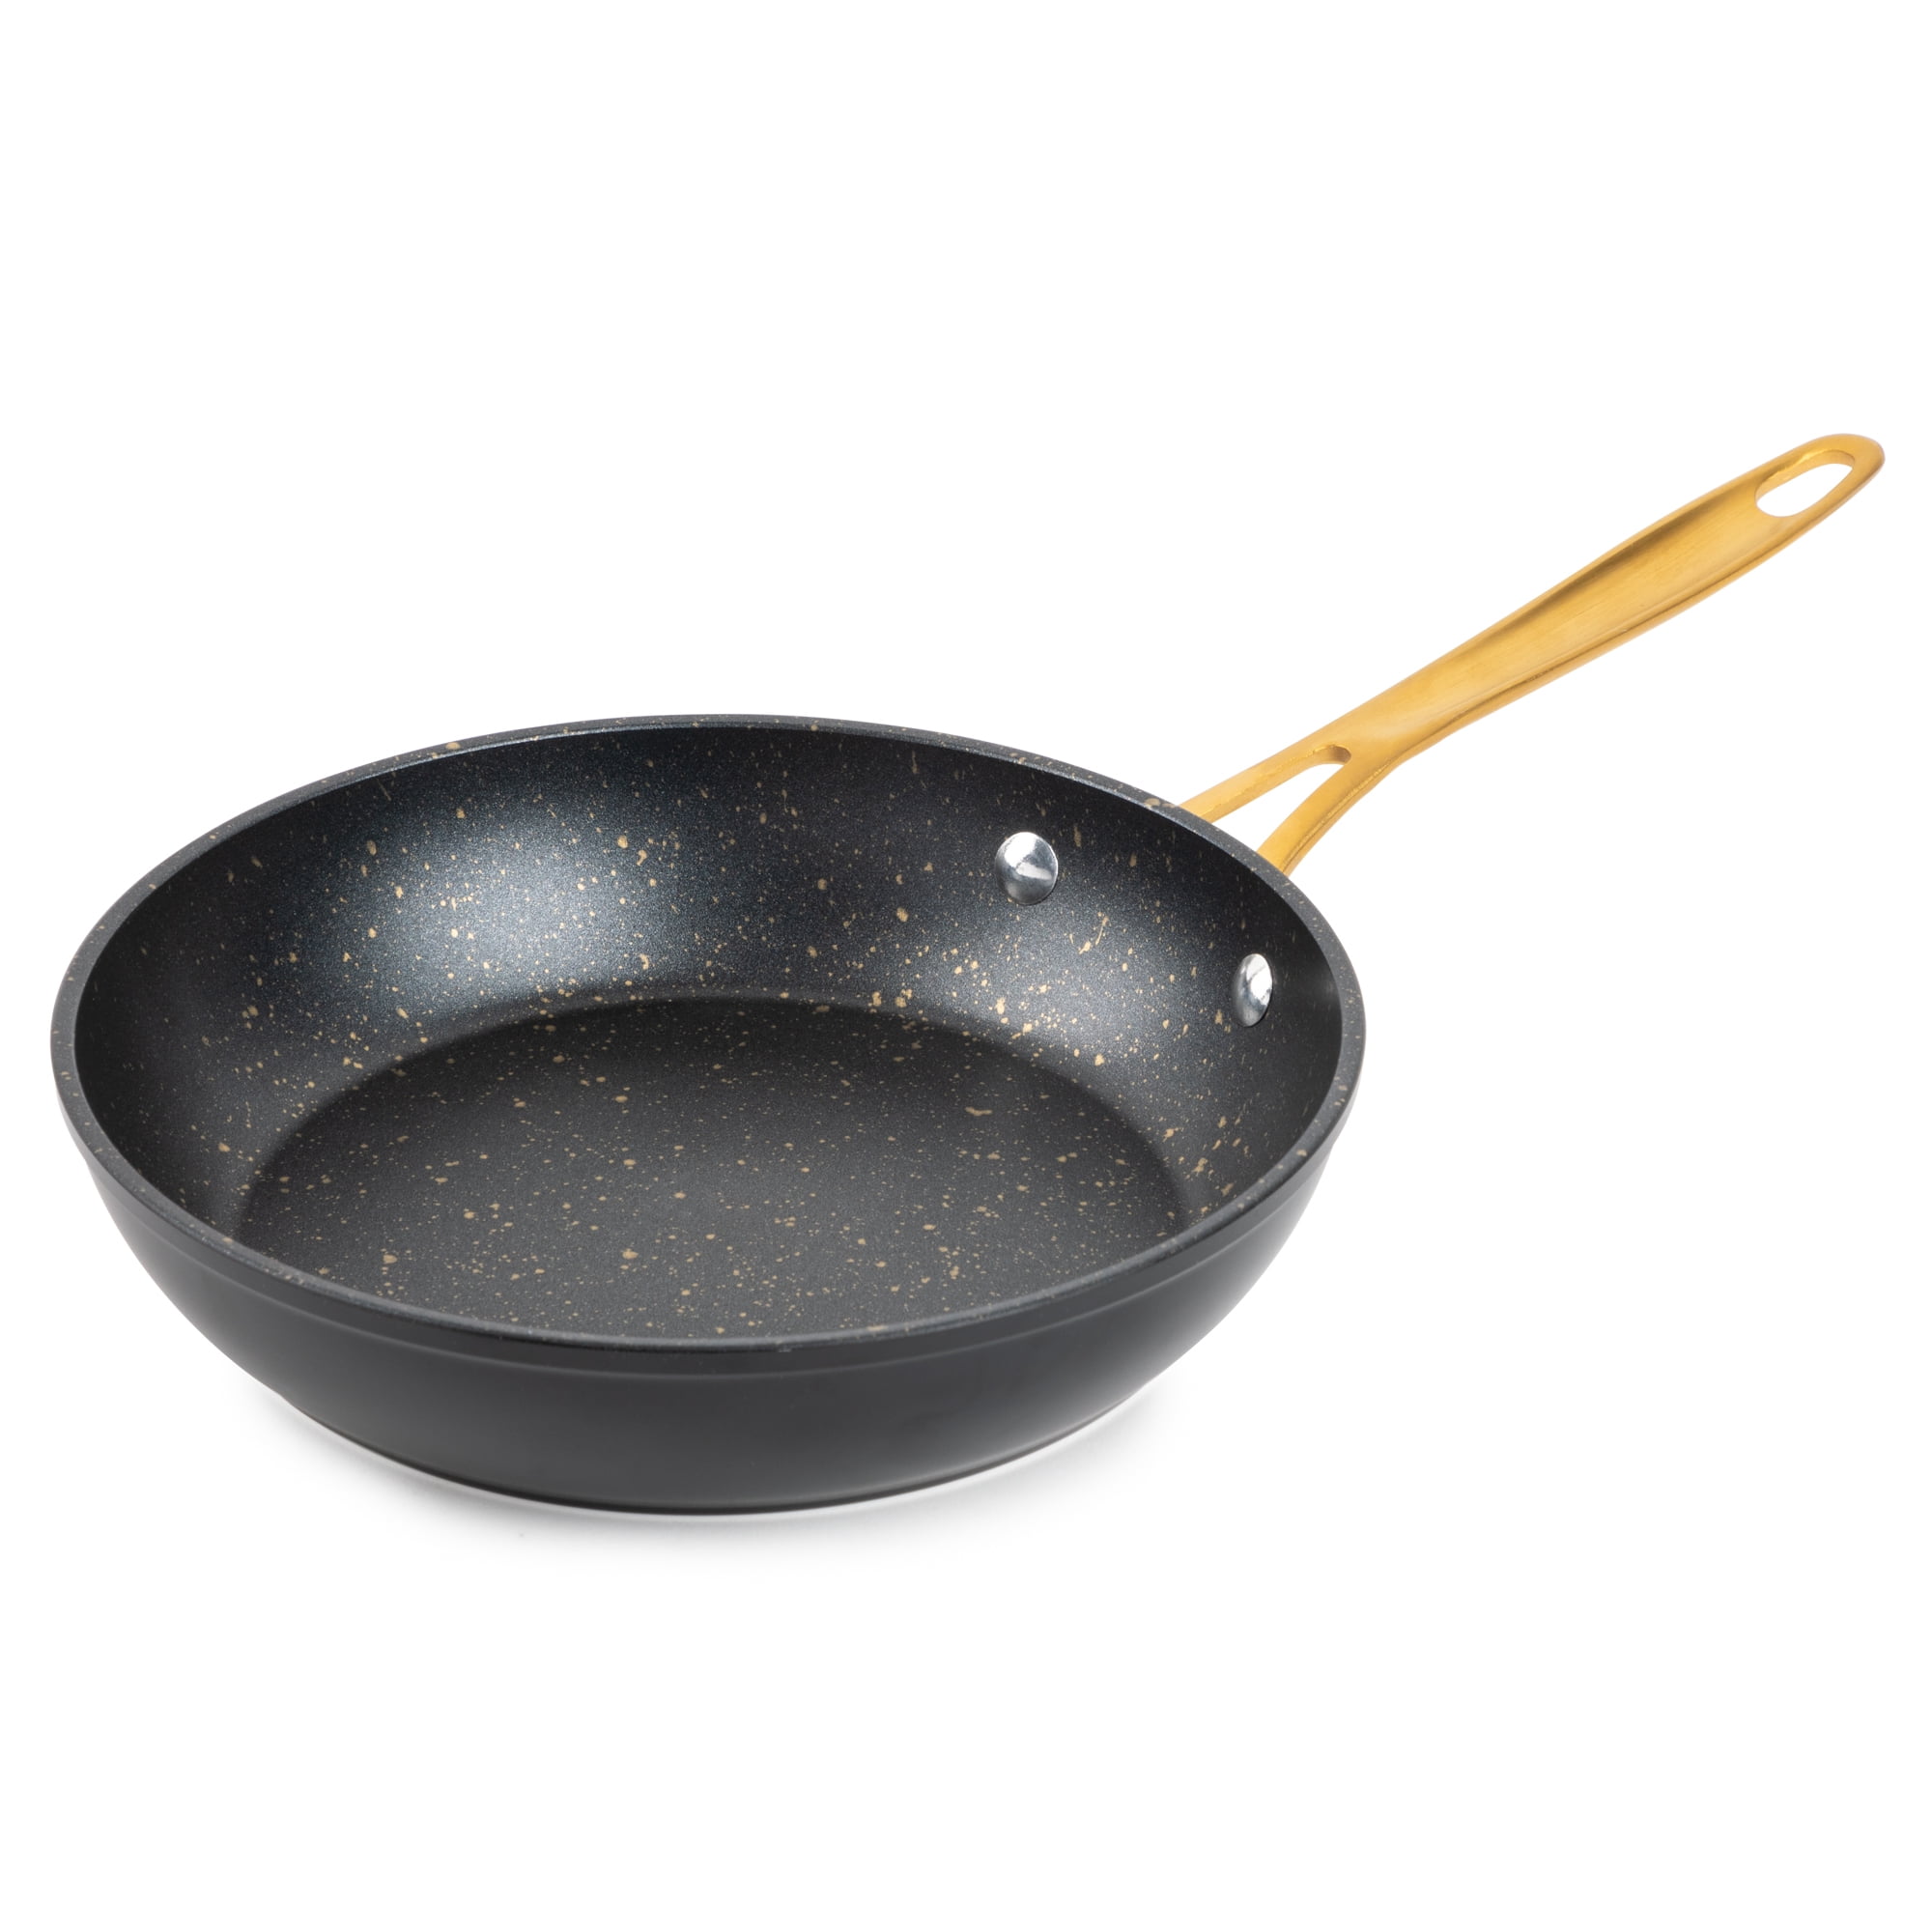 Thyme & Table Non-Stick 8' Inch Gold Fry Pan with Stainless Steel Induction Base